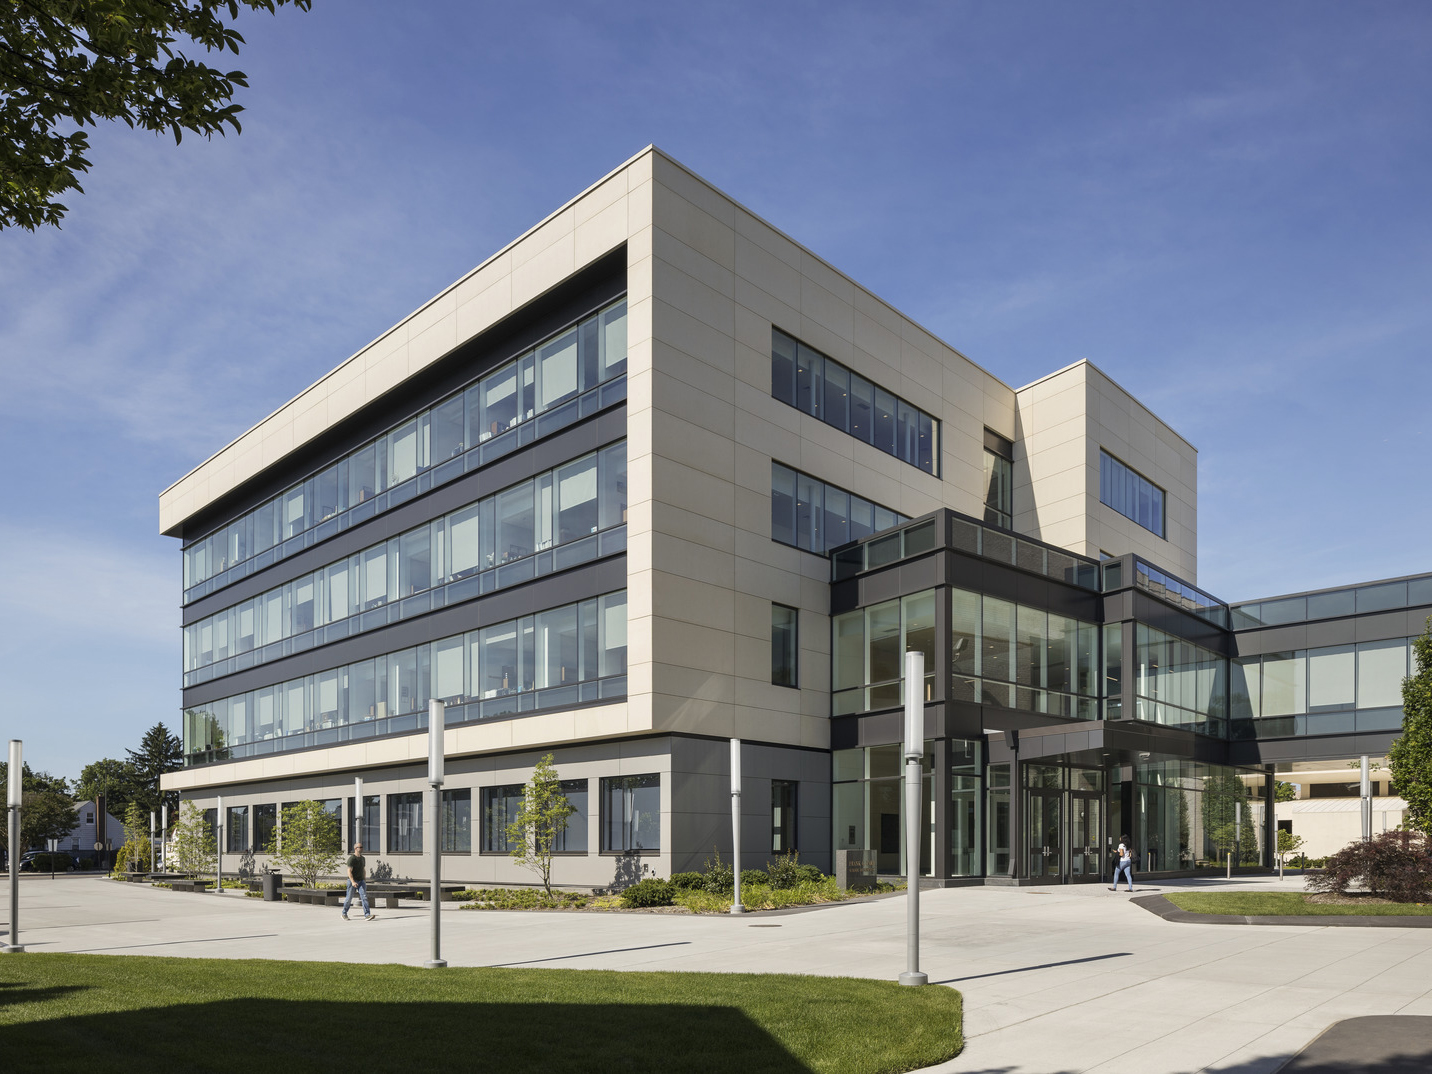 Modern three-story commercial building with an asymmetric facade, featuring a combination of reflective glass windows and pale stone cladding. The ground level’s expansive glazing enhances the indoor-outdoor connection, set against landscaped surroundings.